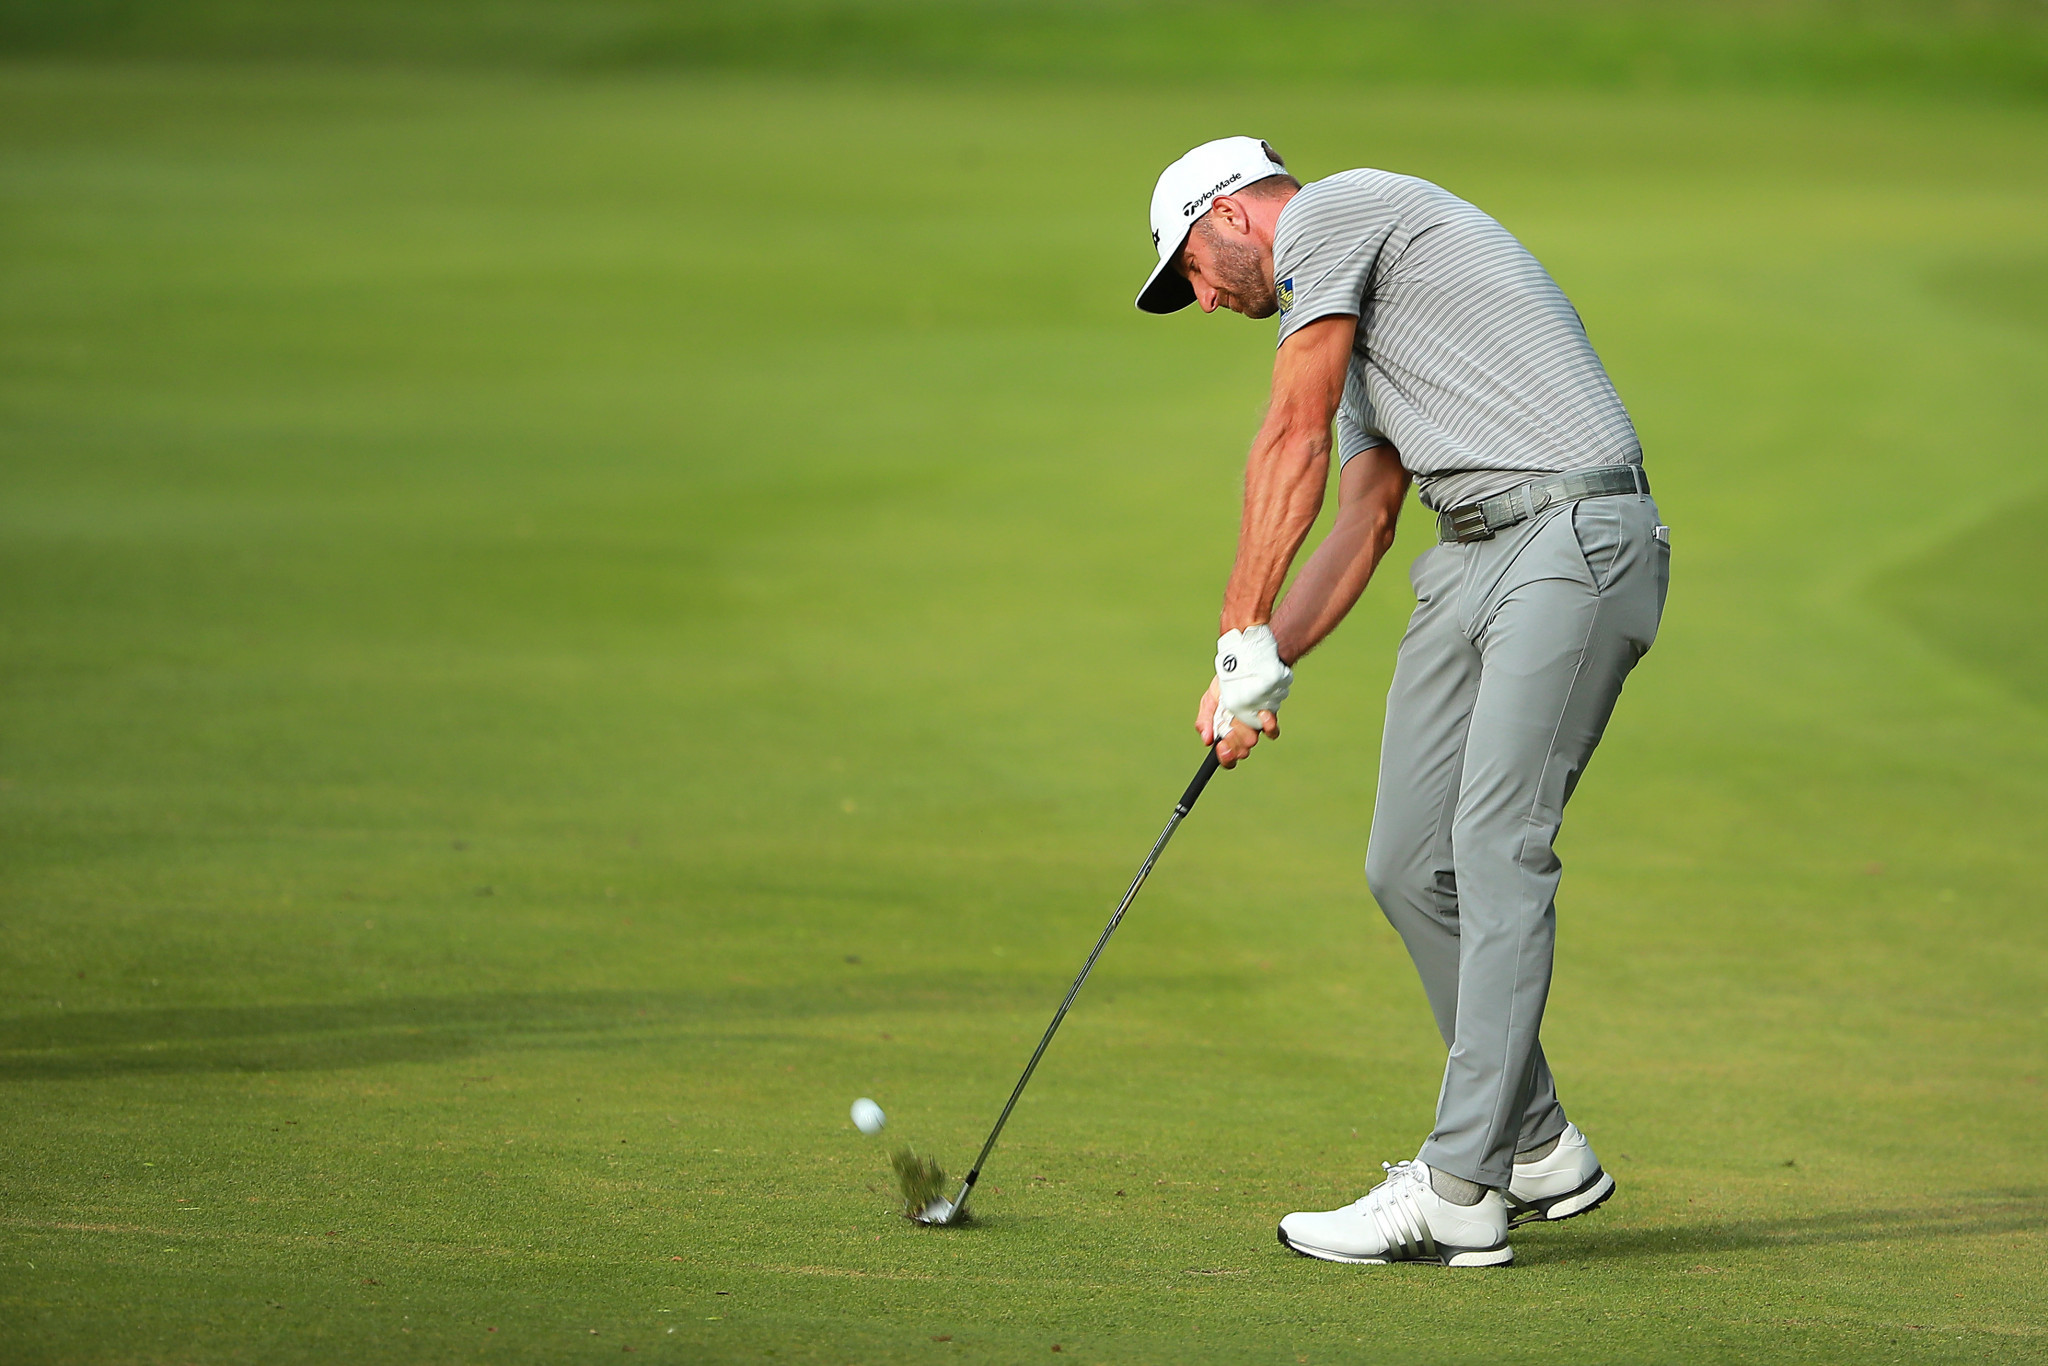 Dustin Johnson of the United States leads the WGC-Mexico Championship at the halfway point ©Getty Images